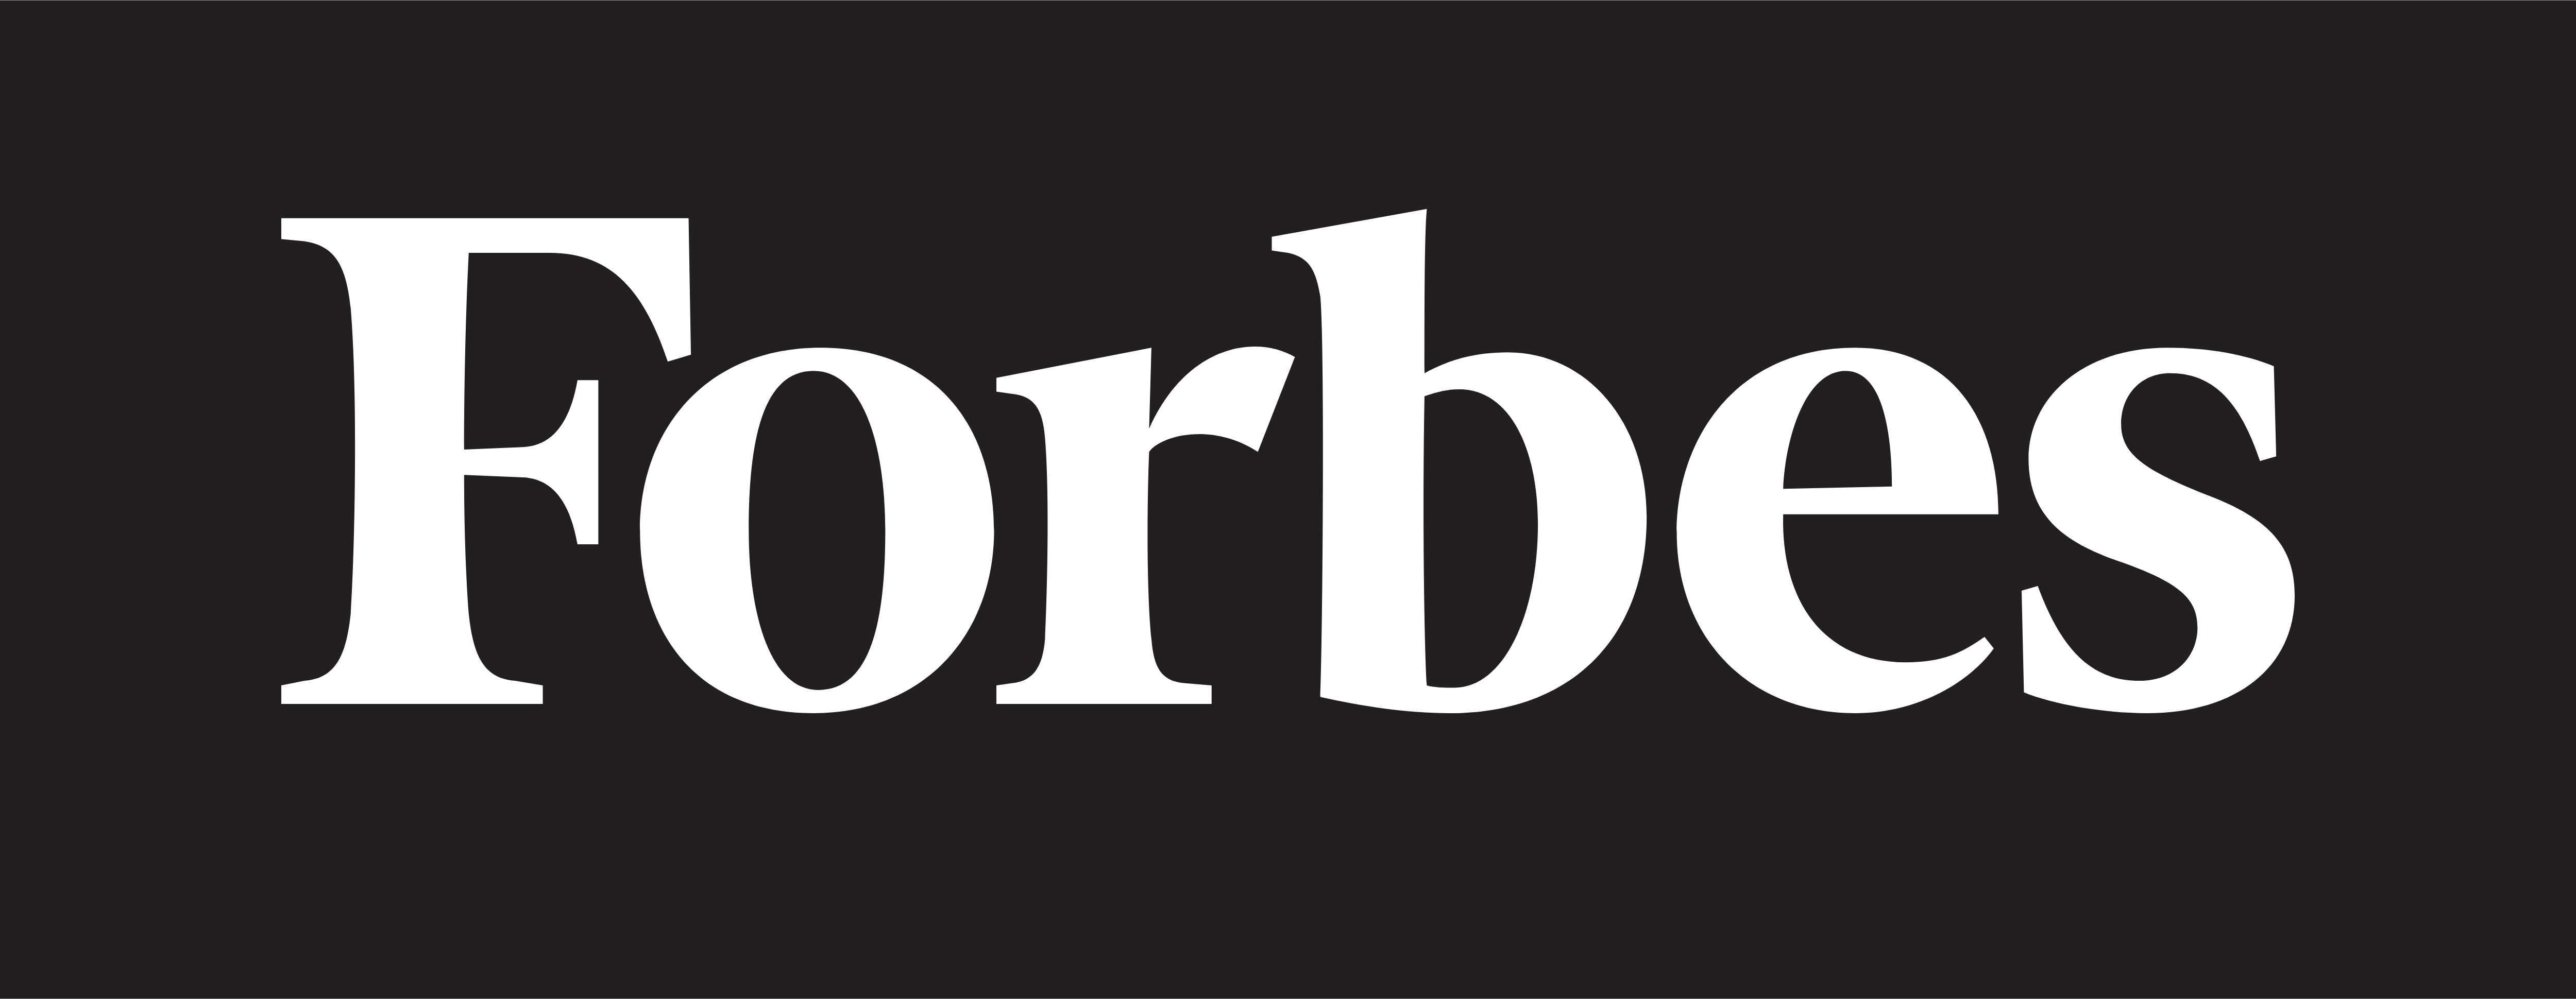 forbes logo with black background and white letters says "forbes"